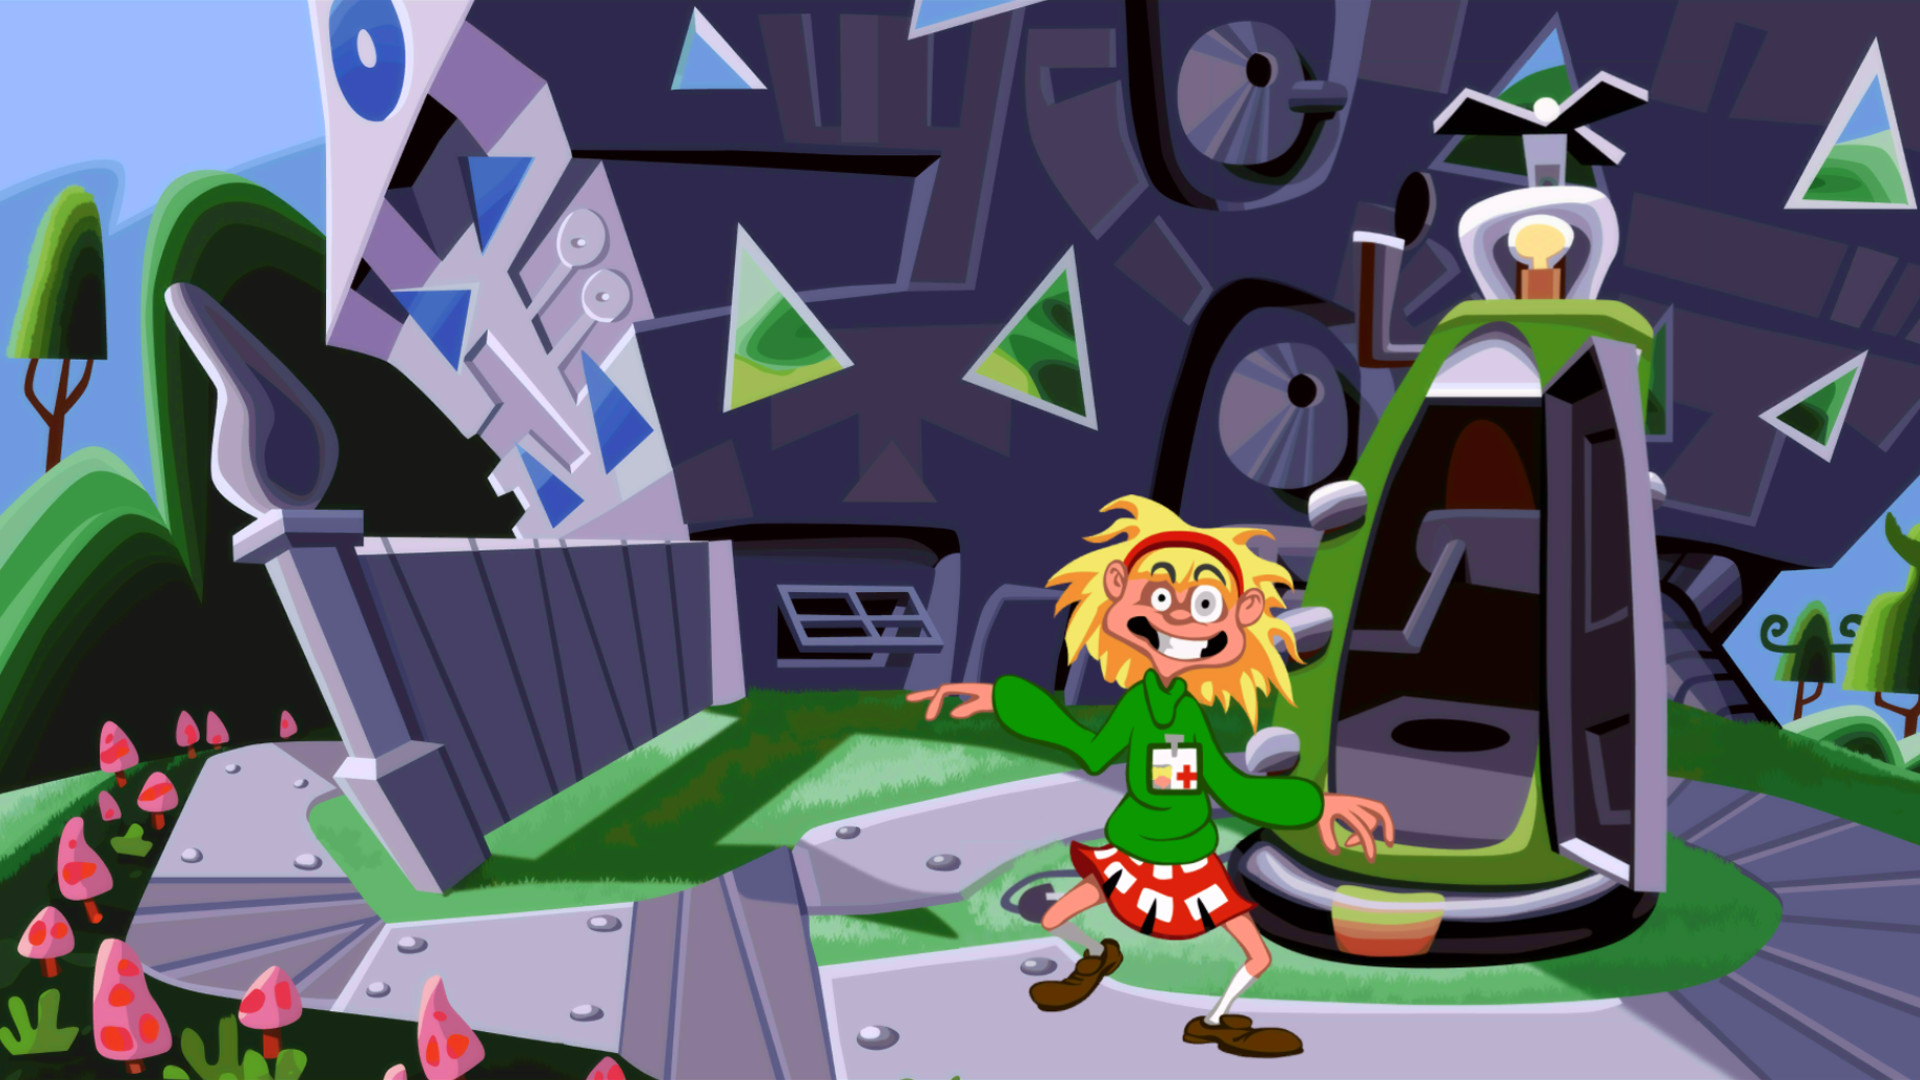 Day of the Tentacle Remastered Free PC Download